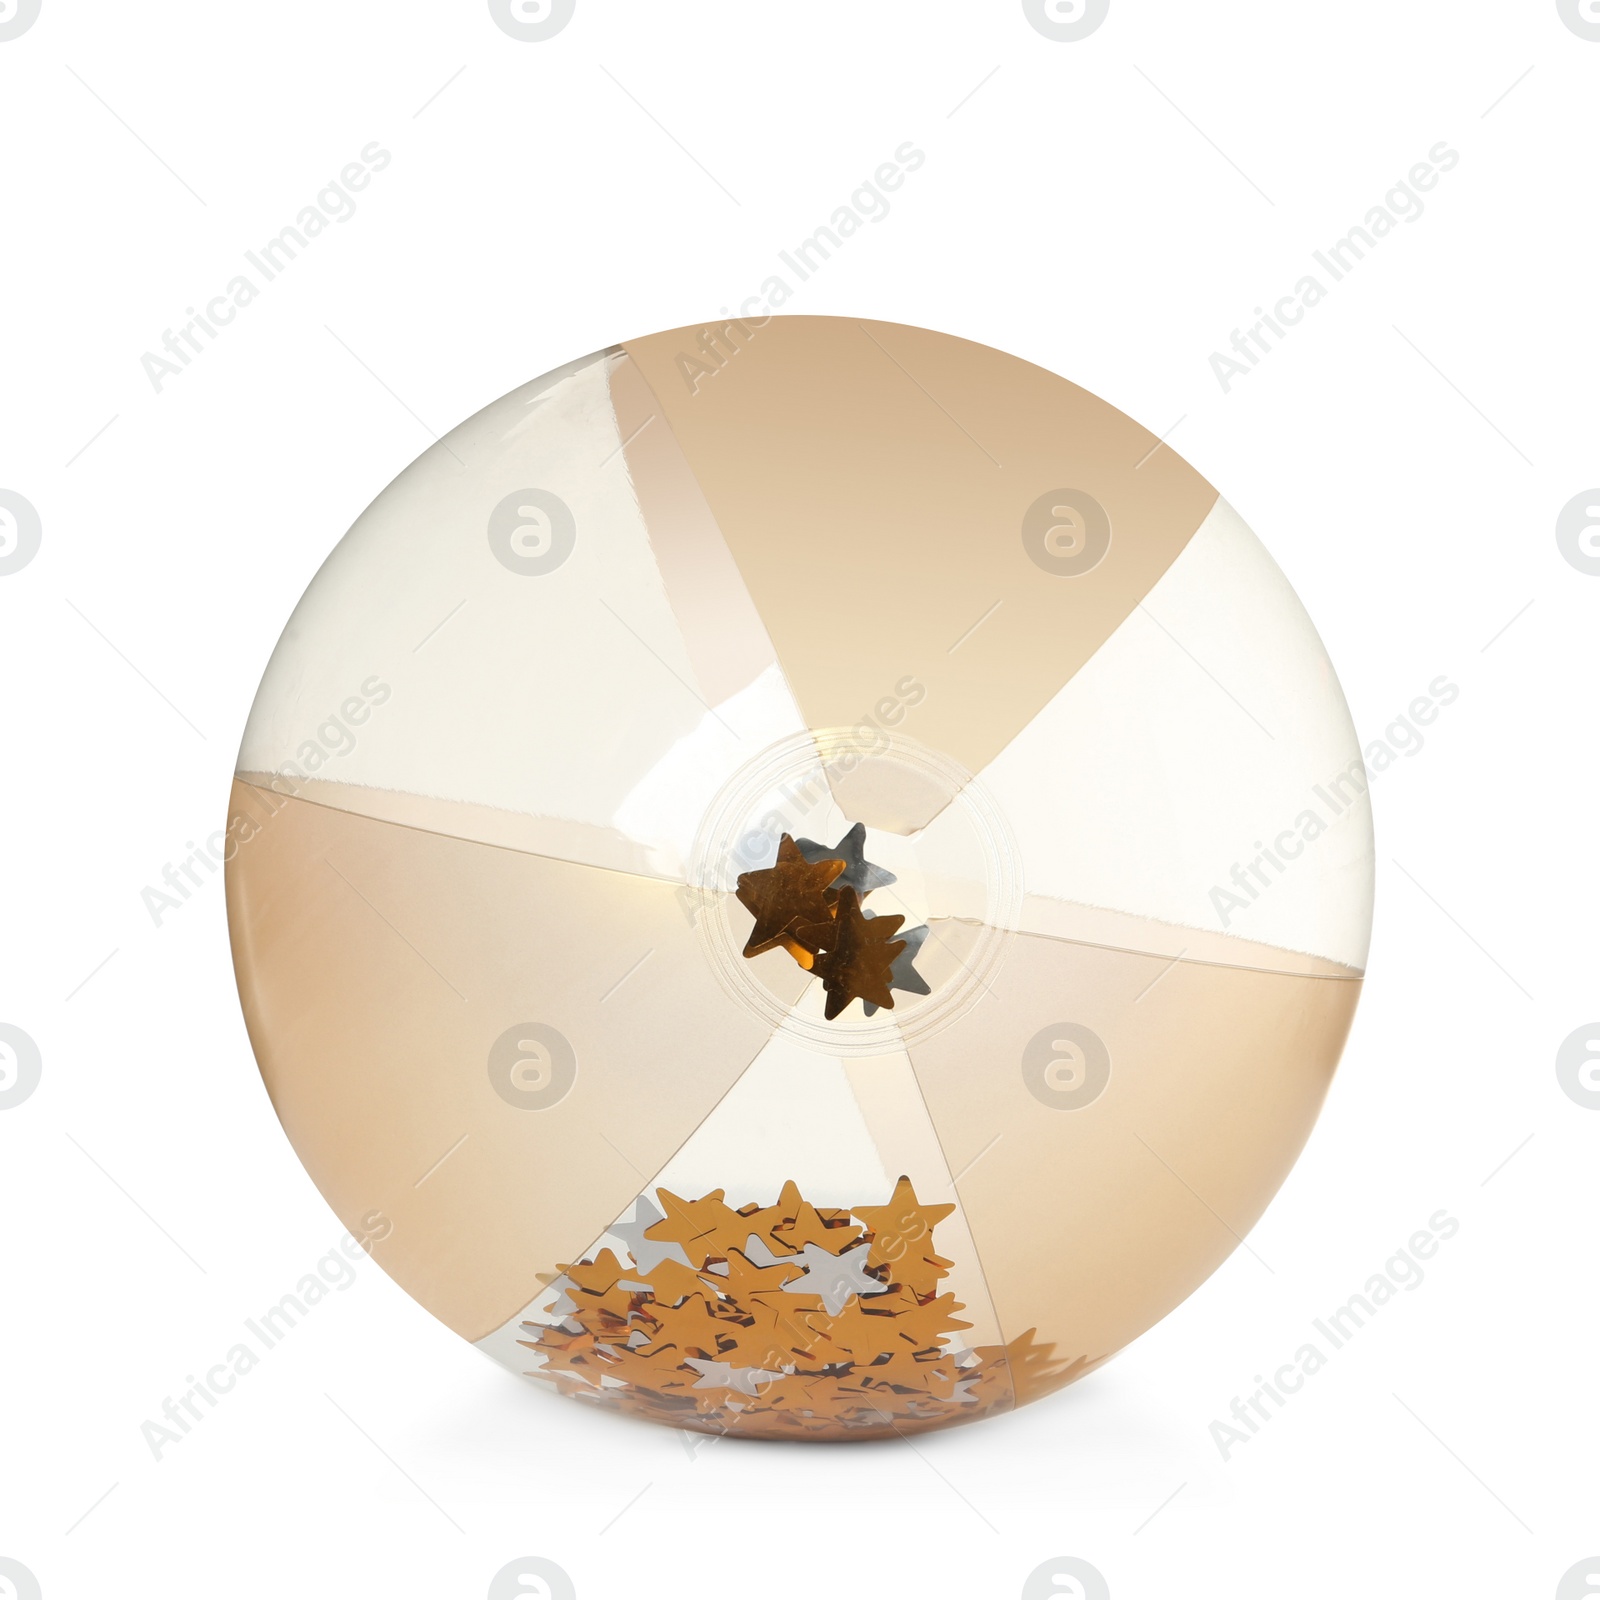 Photo of Inflatable beach ball with confetti inside isolated on white